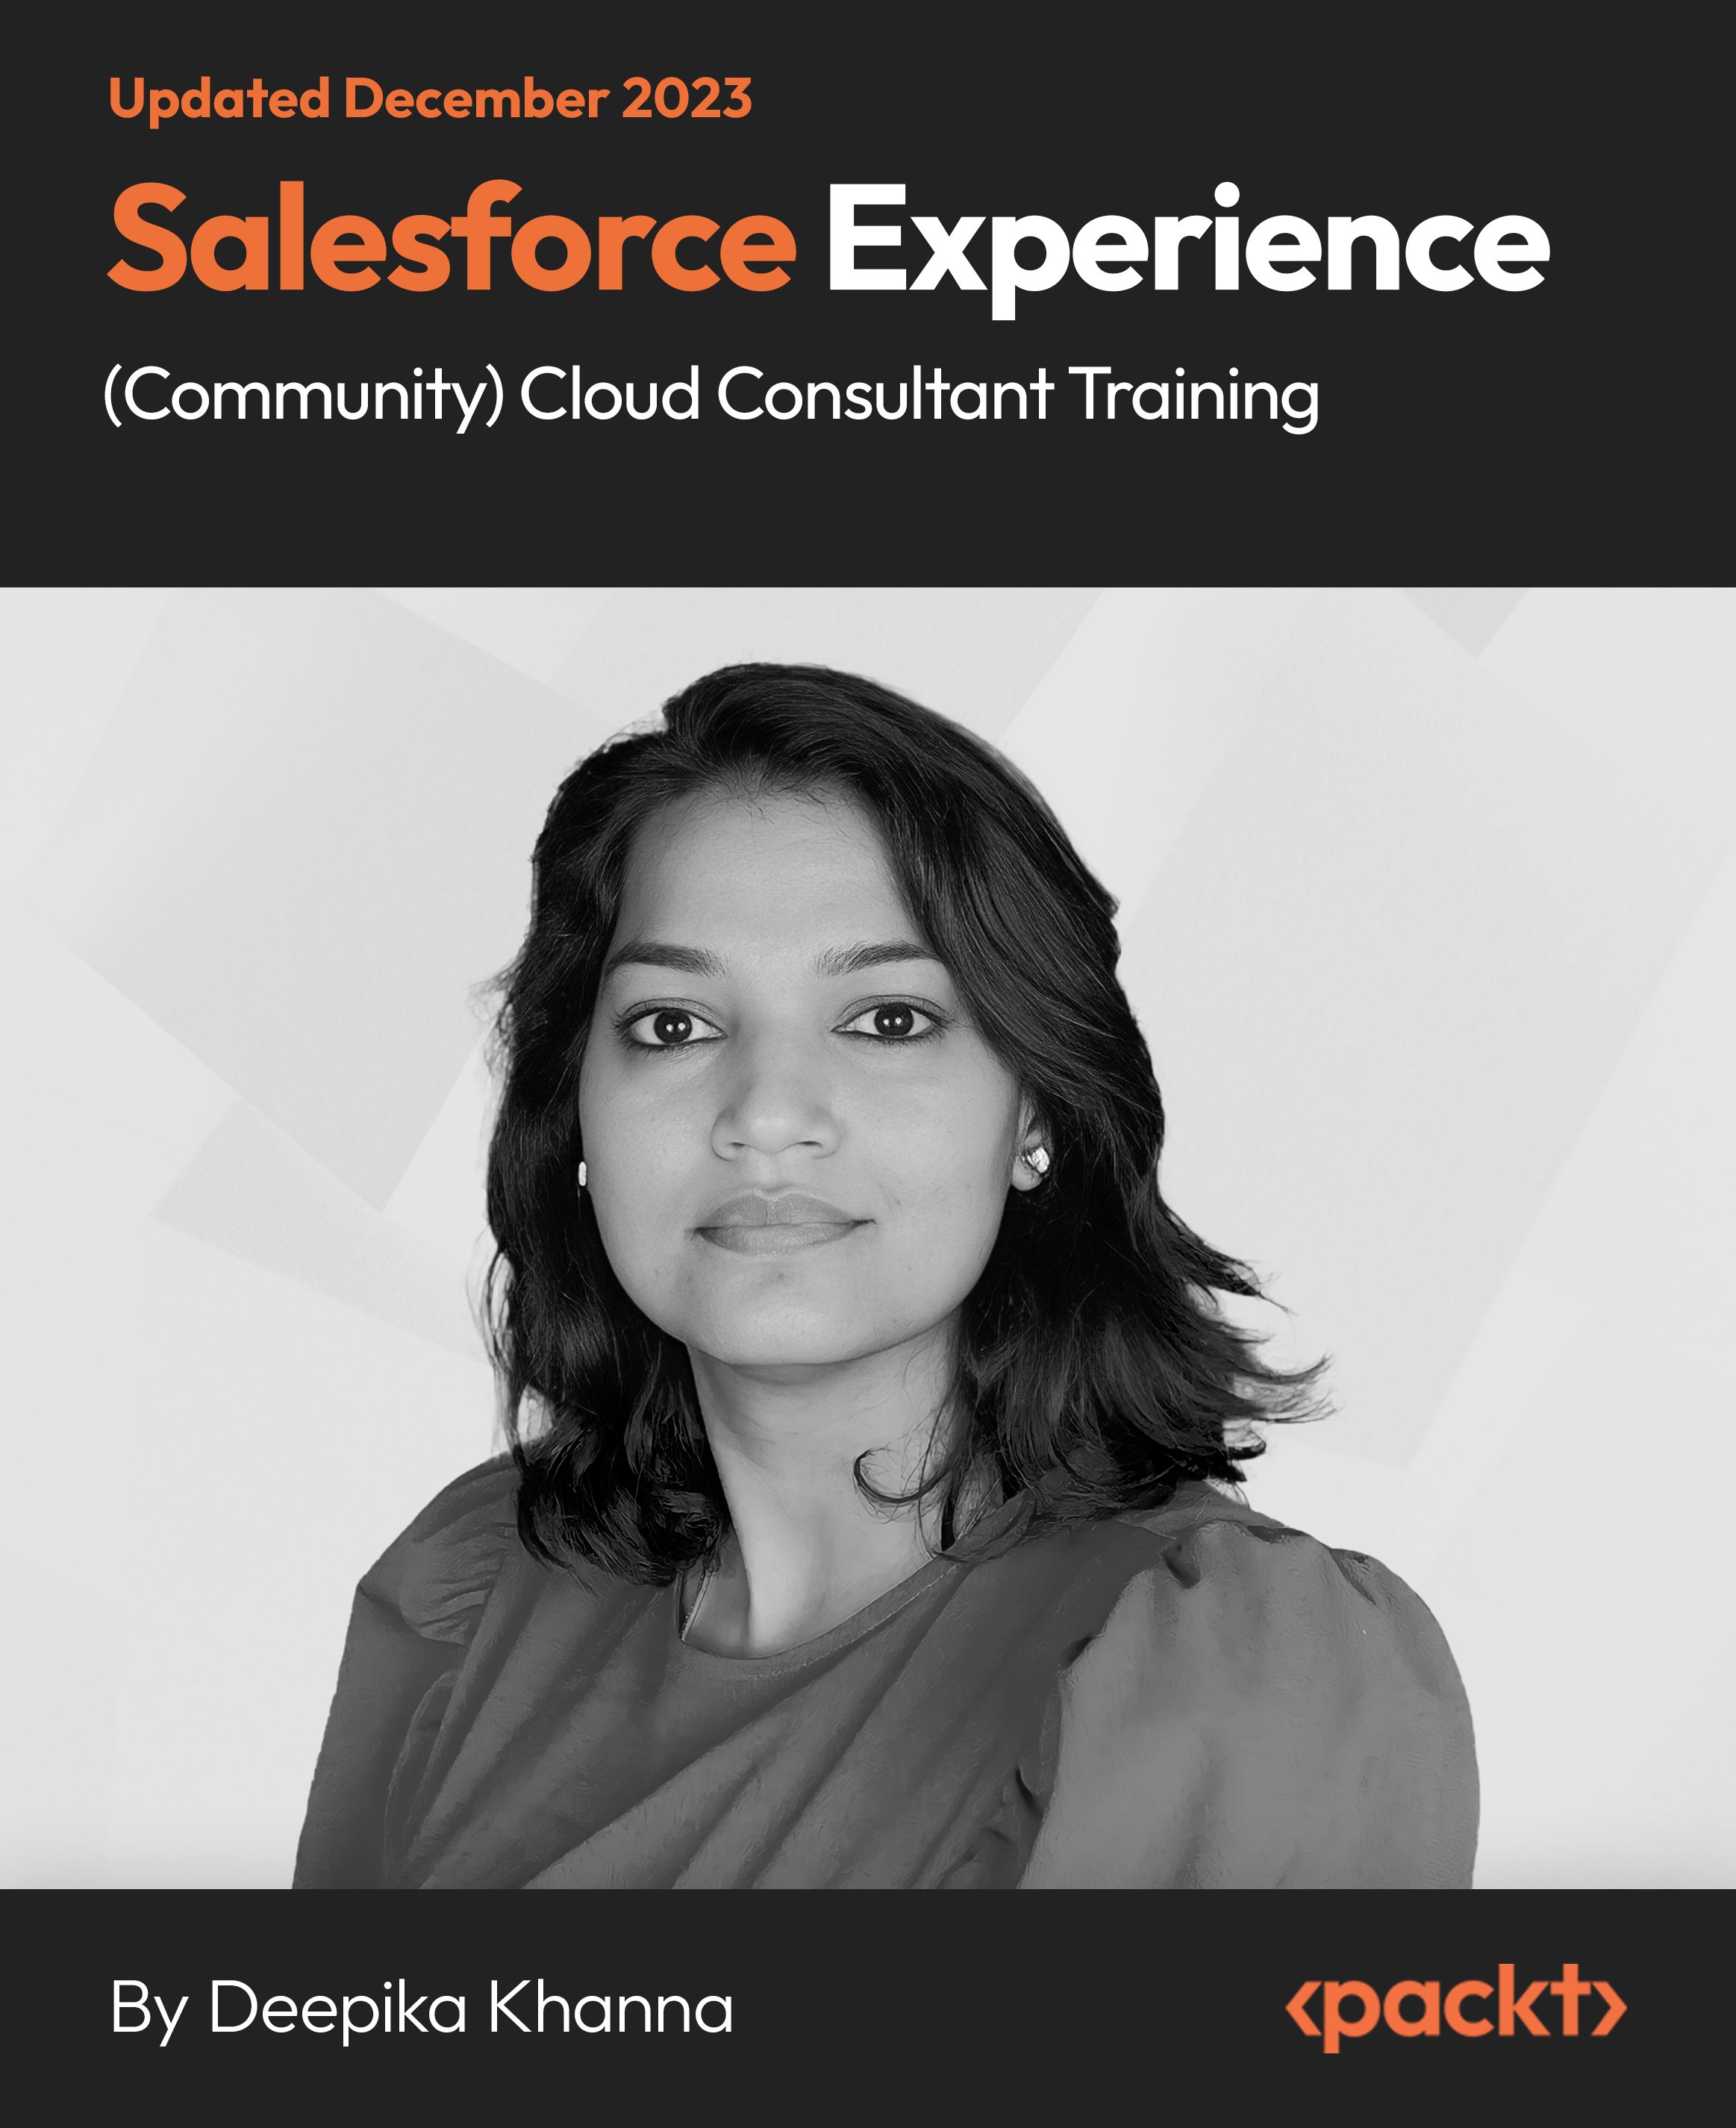 Salesforce Experience (Community) Cloud Consultant Training